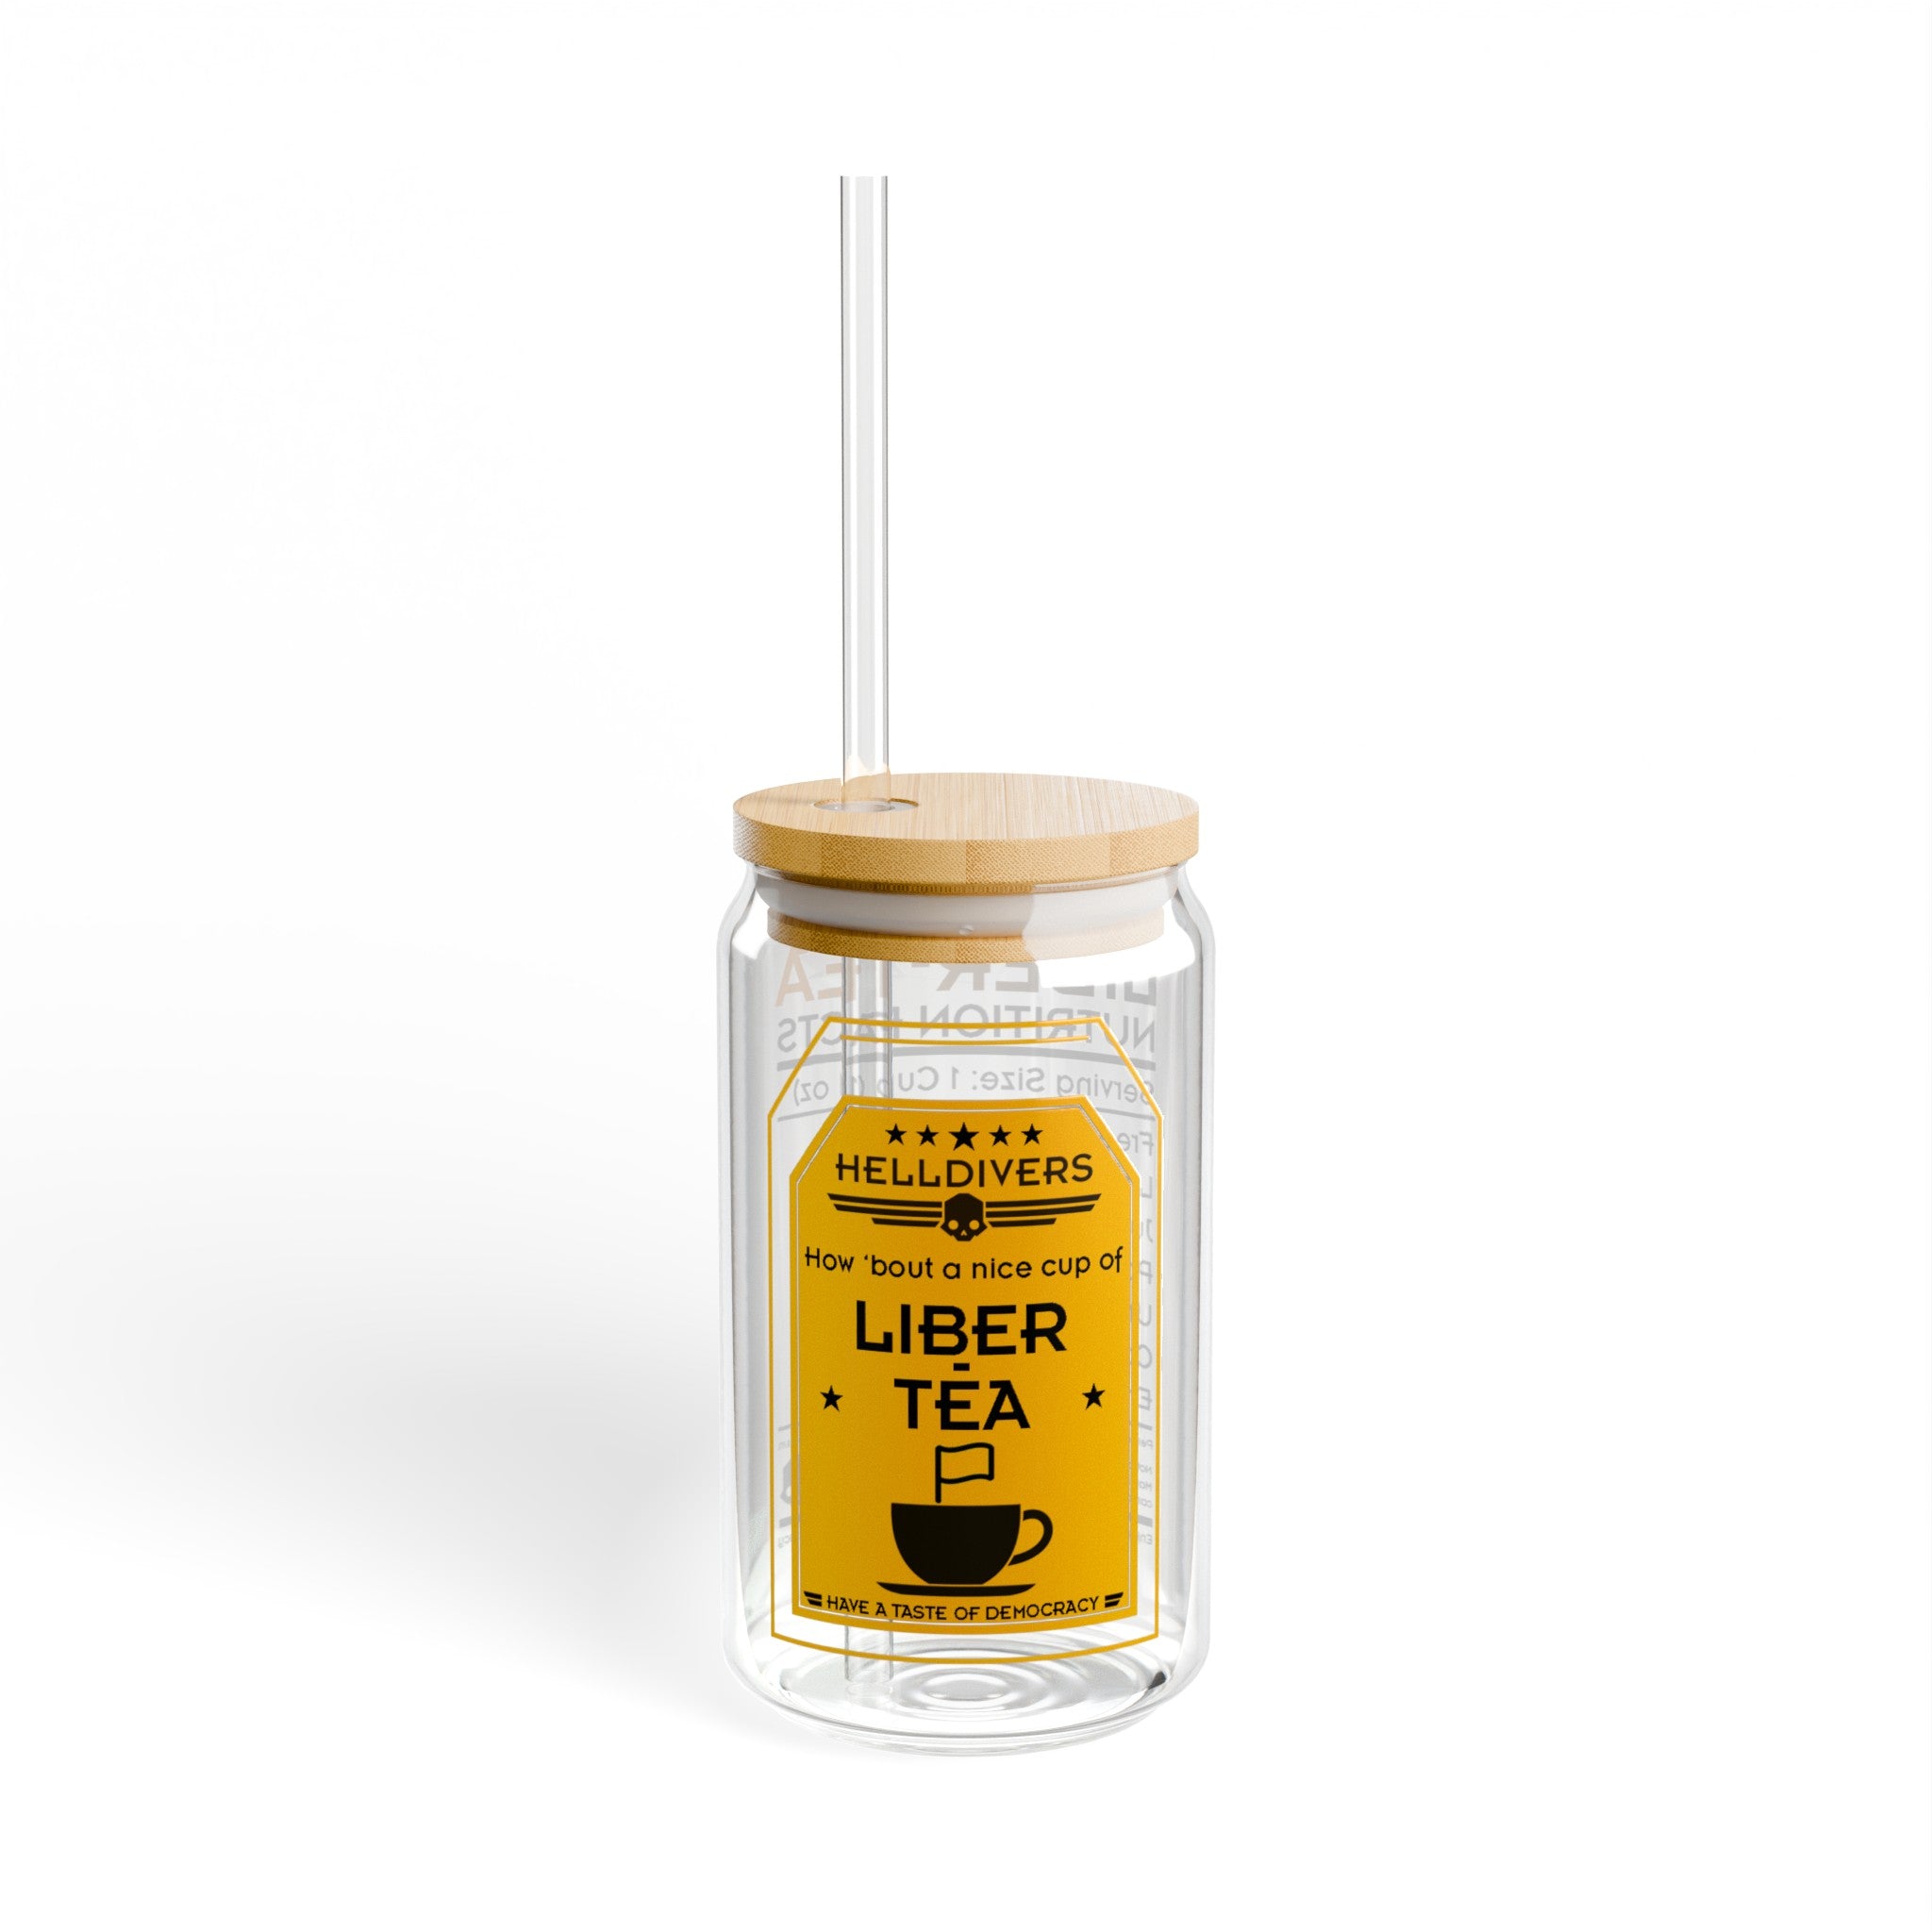 Helldivers 2 Liber-tea Glass Sipper Glass, 16oz Mug Mugs Cups Cup Glasses Helldiver Gift For Him Her Gamer Liberty Libertea Liber-tea Funny Cute Cool Cup Gamer Game Gifts Birthday Christmas Valentine's